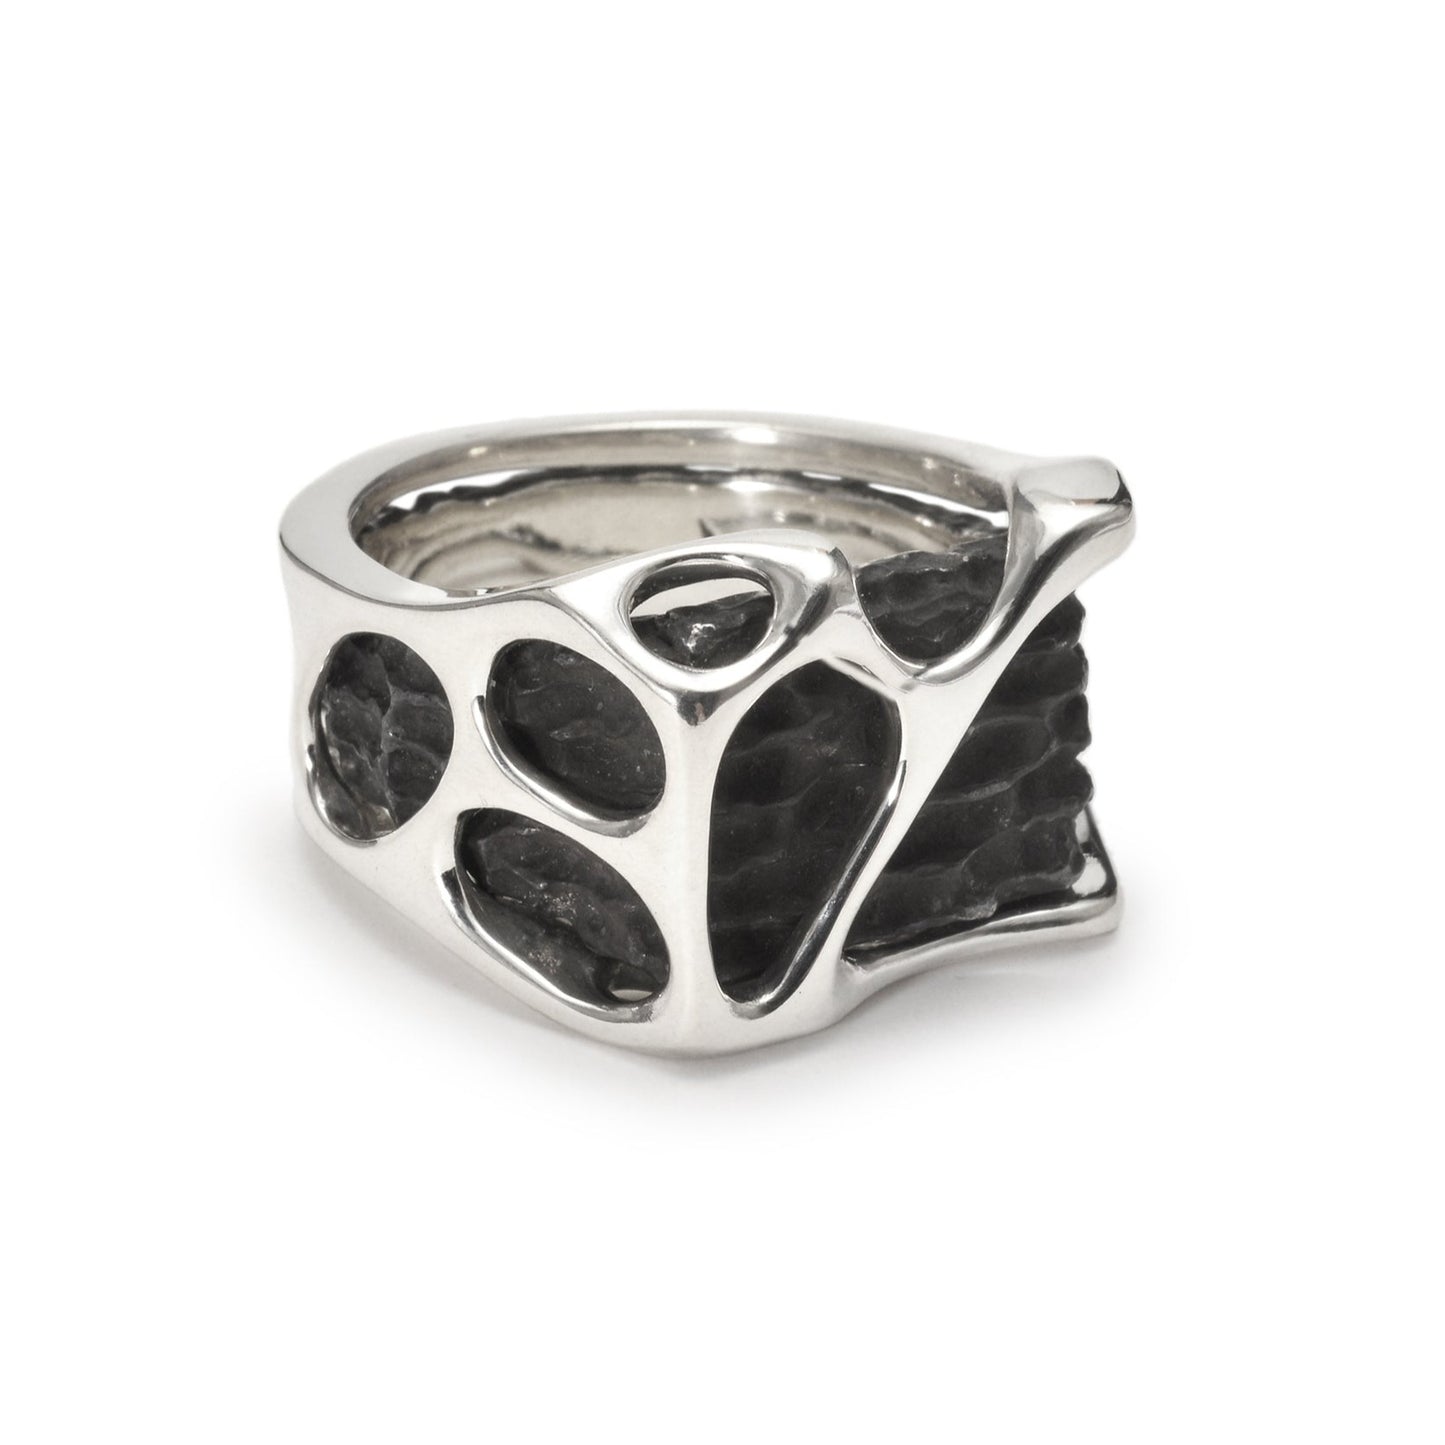 R-101 fusion - Square sterling silver combination signet ring